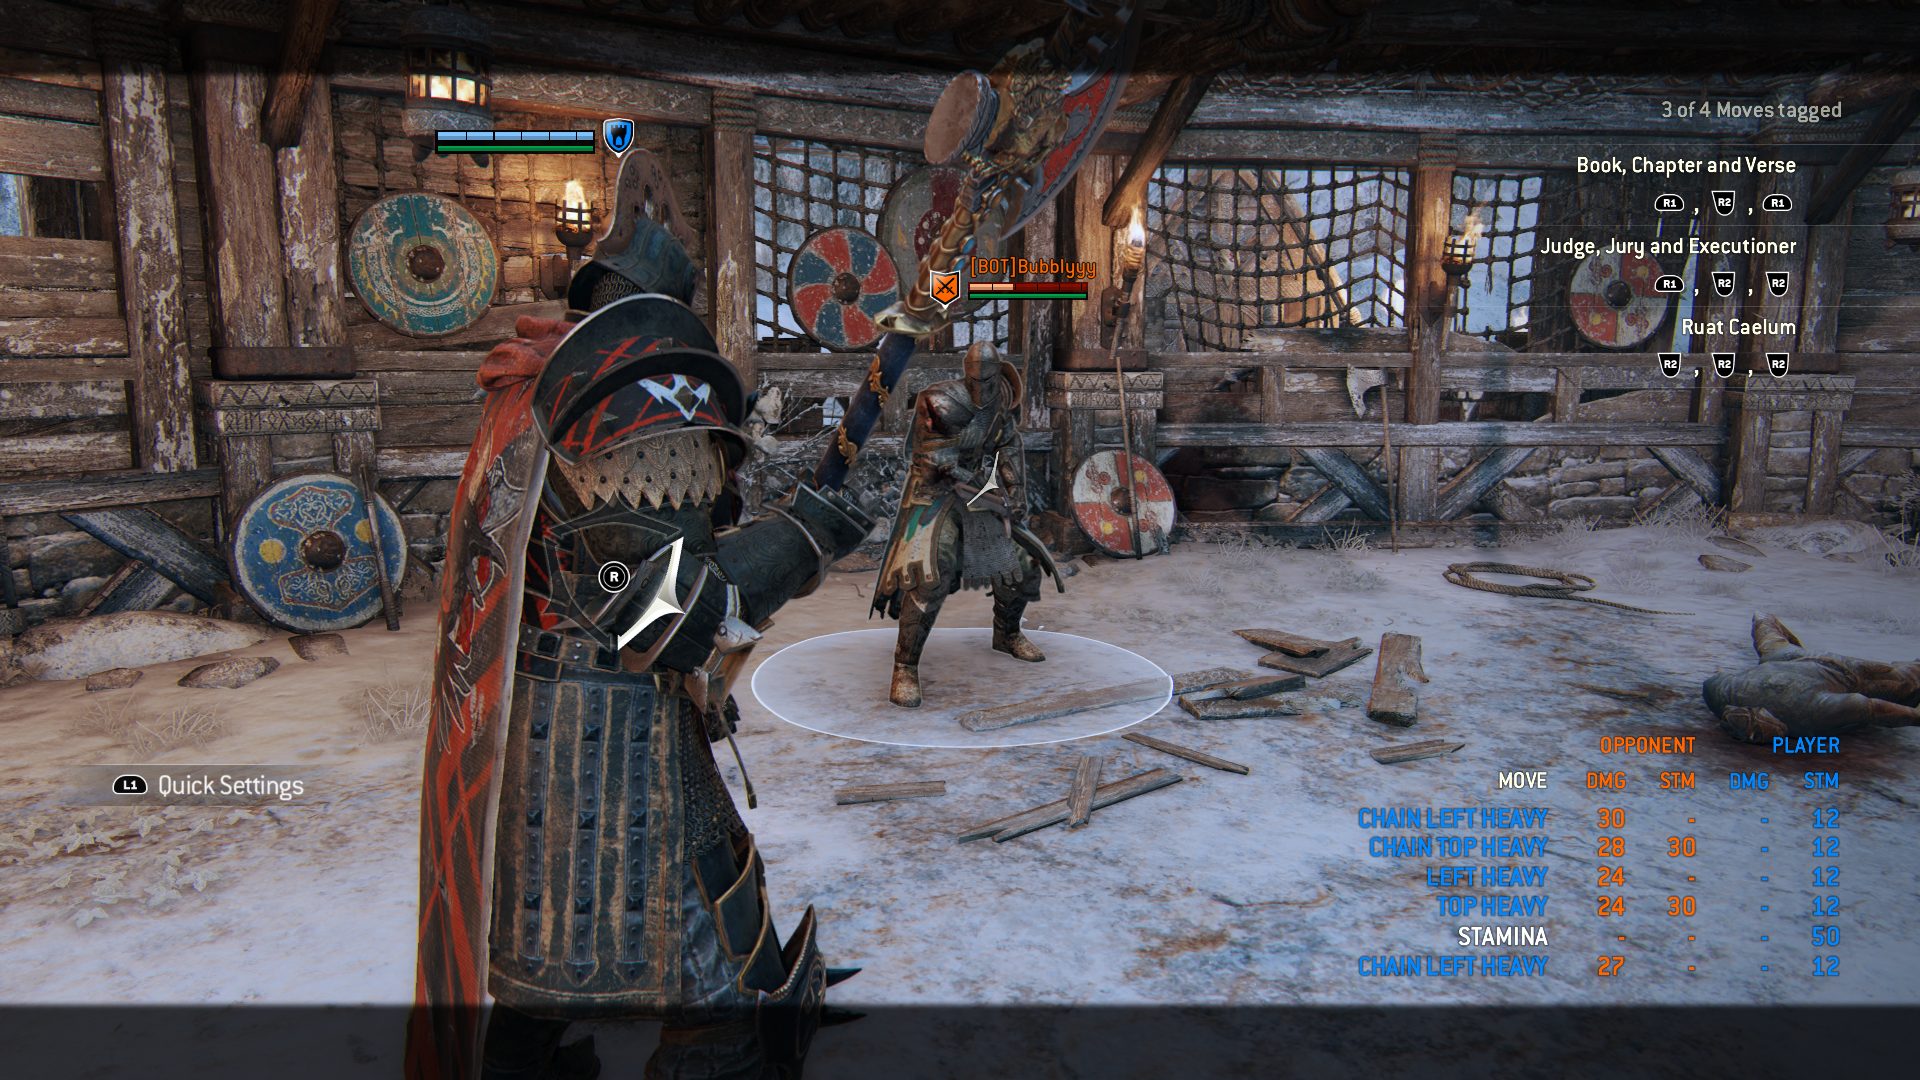 In-game screenshot of For Honor. The unique HUD is visible